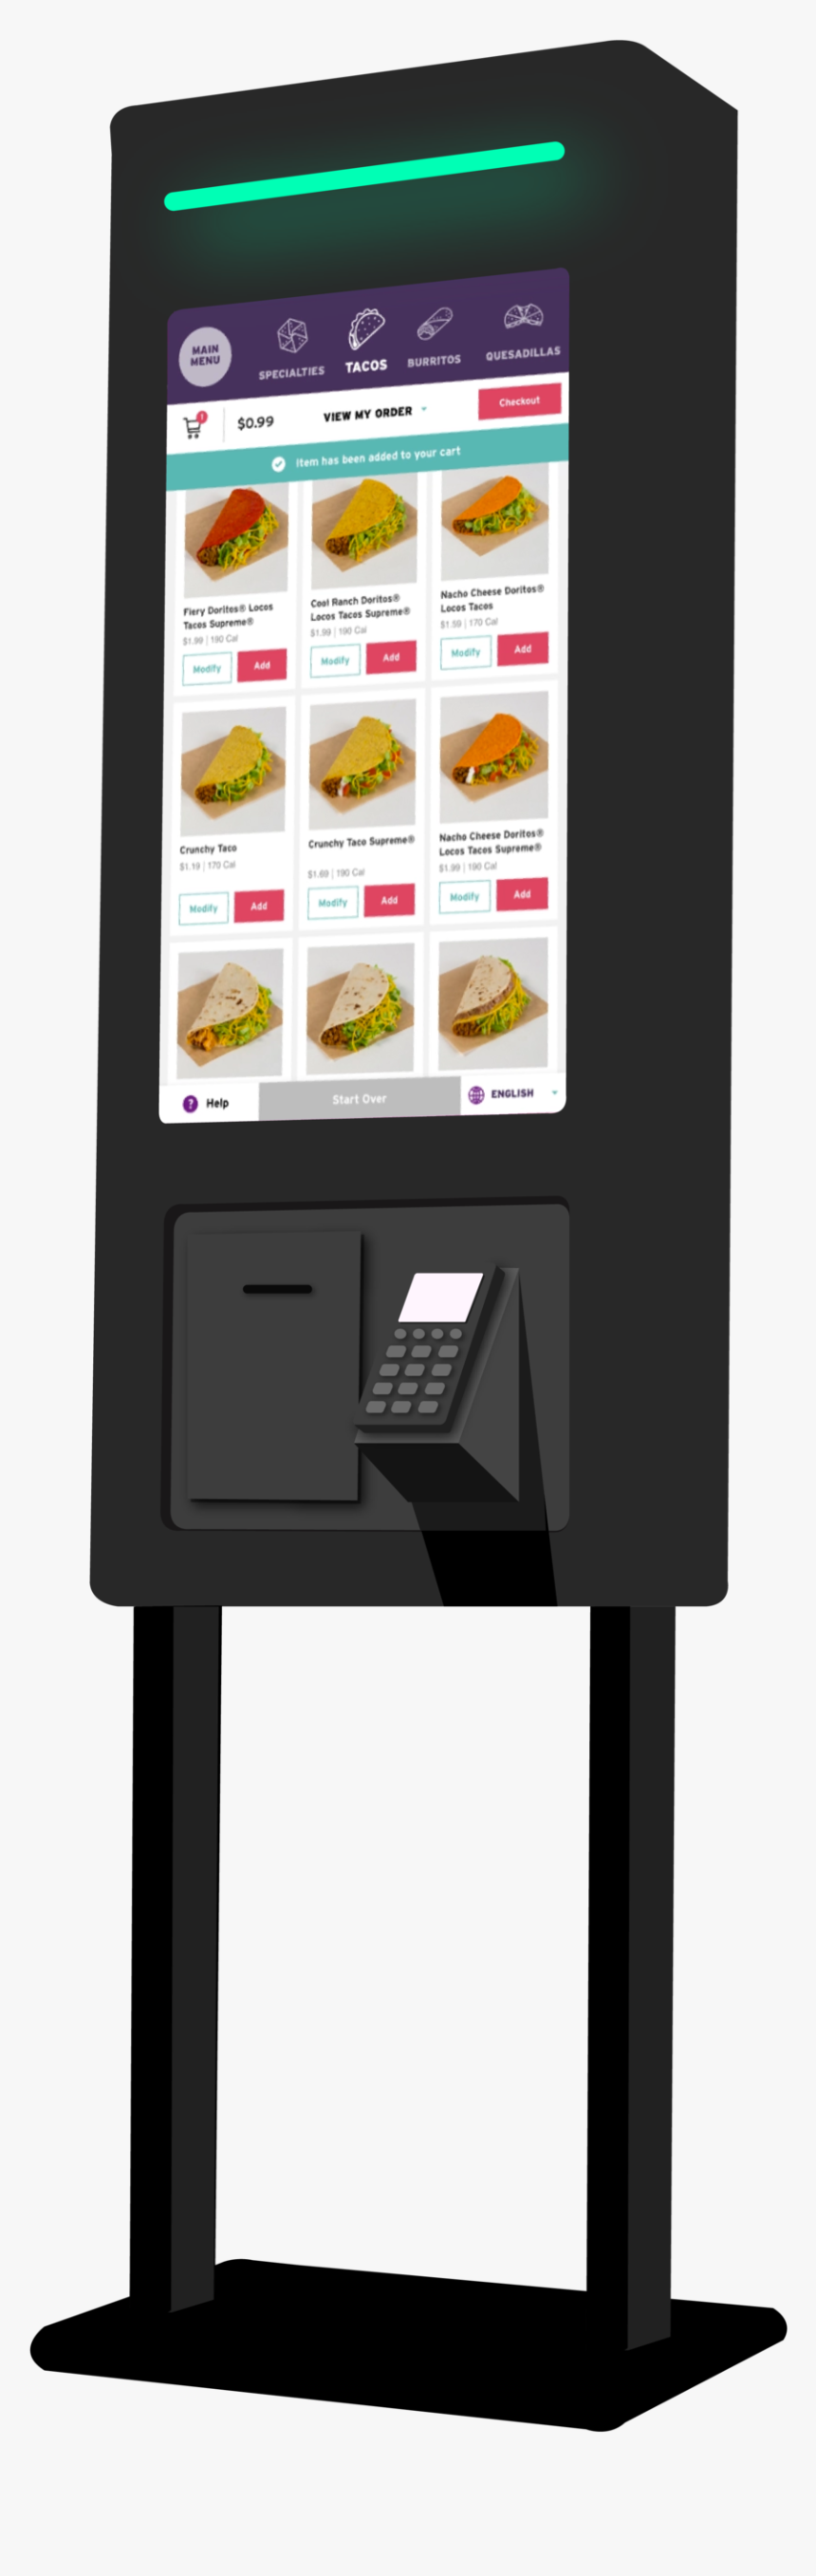 Kiosk4-02 - Small Appliance, HD Png Download, Free Download